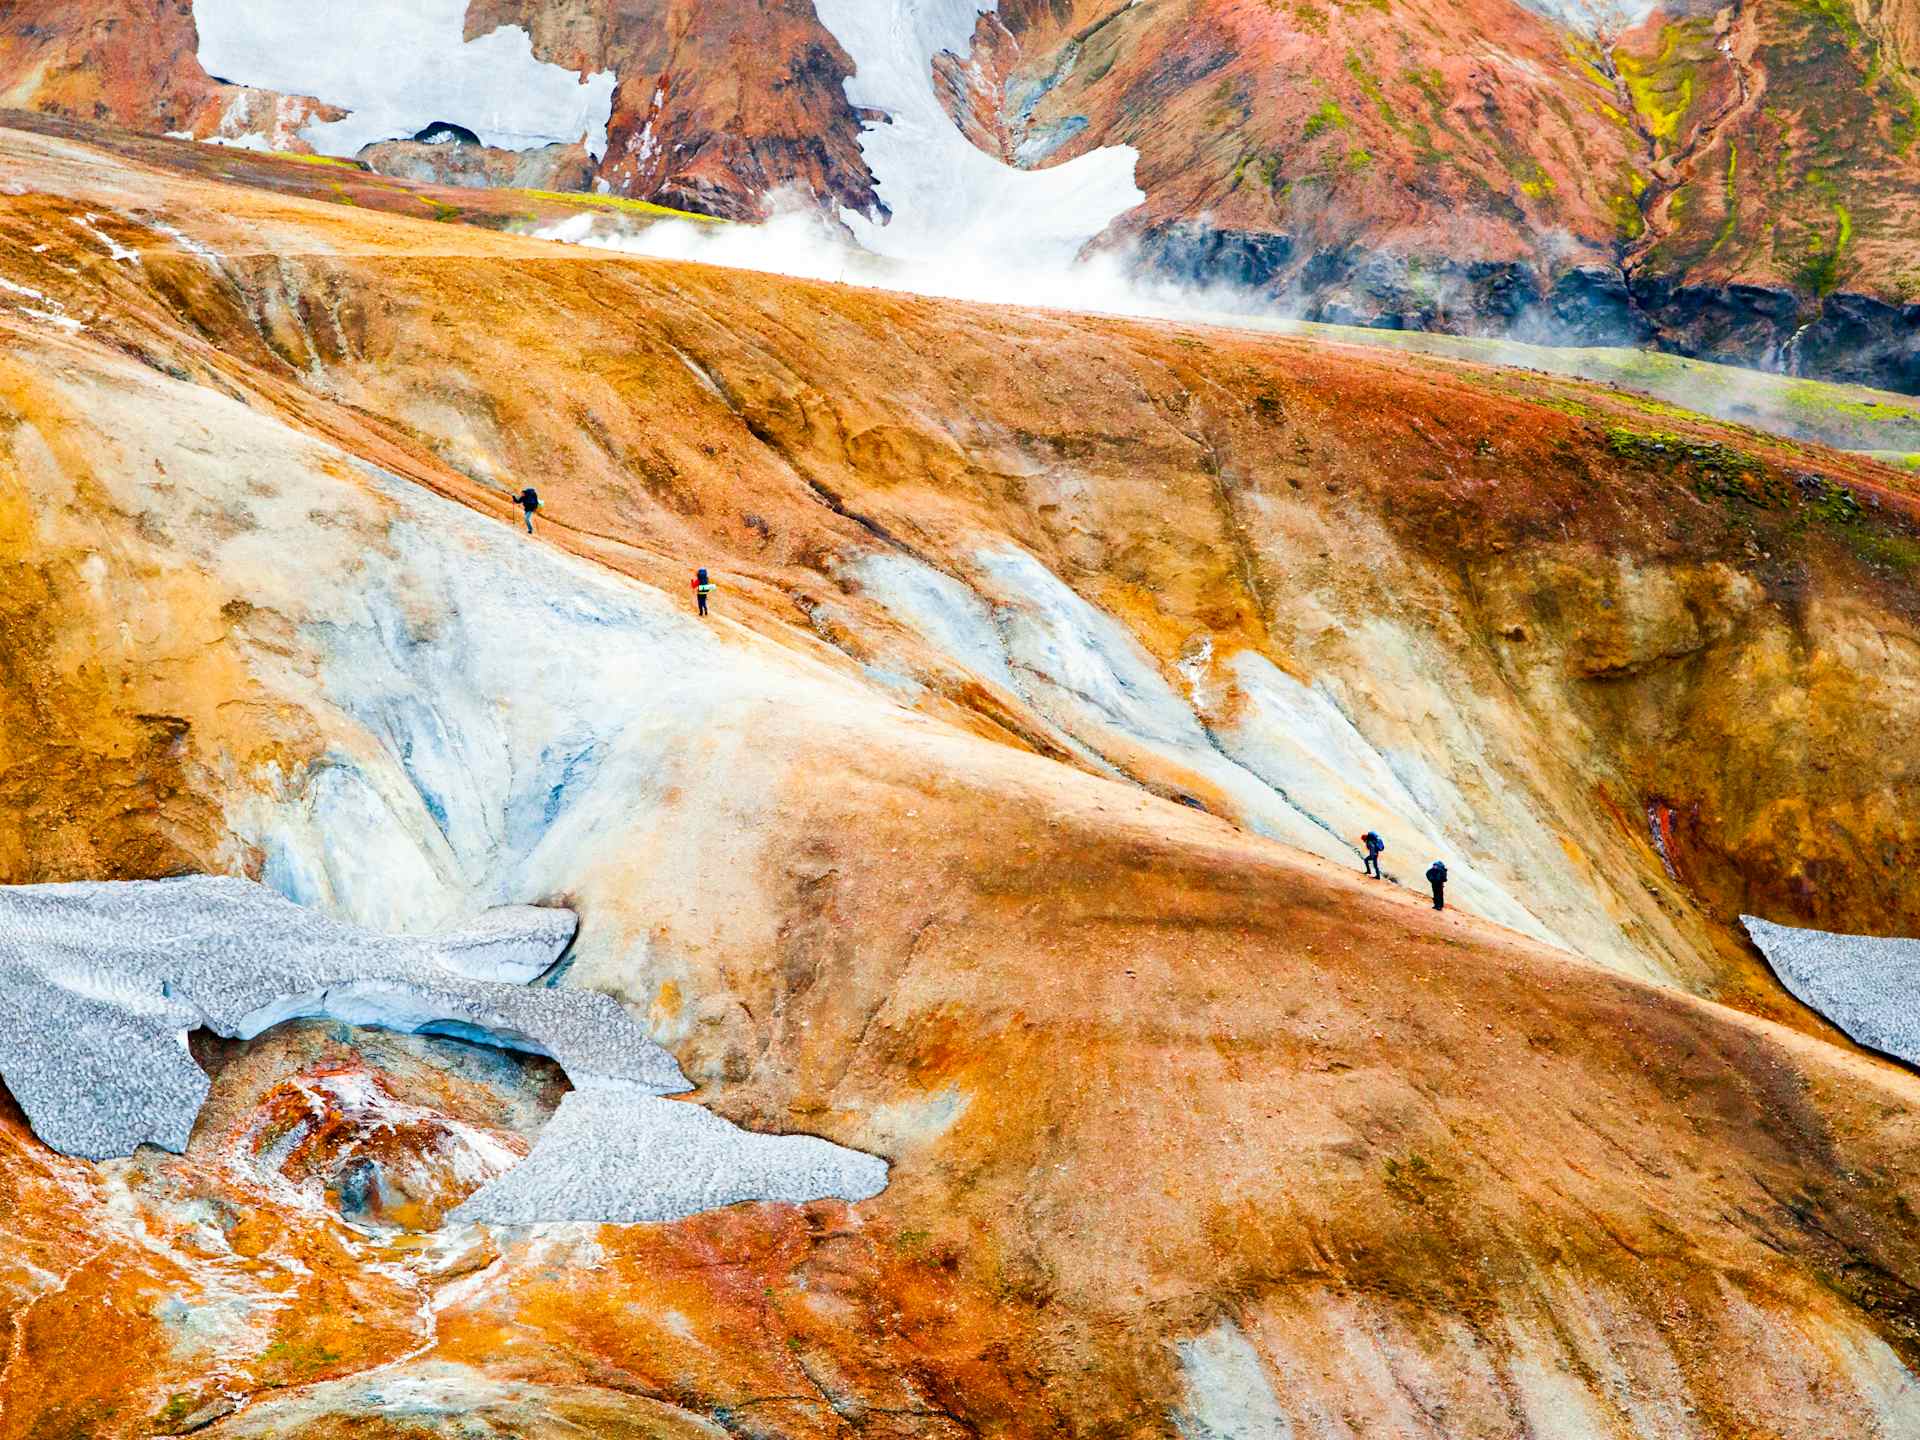 Hiking on the Laugavegur. Photo: Getty.